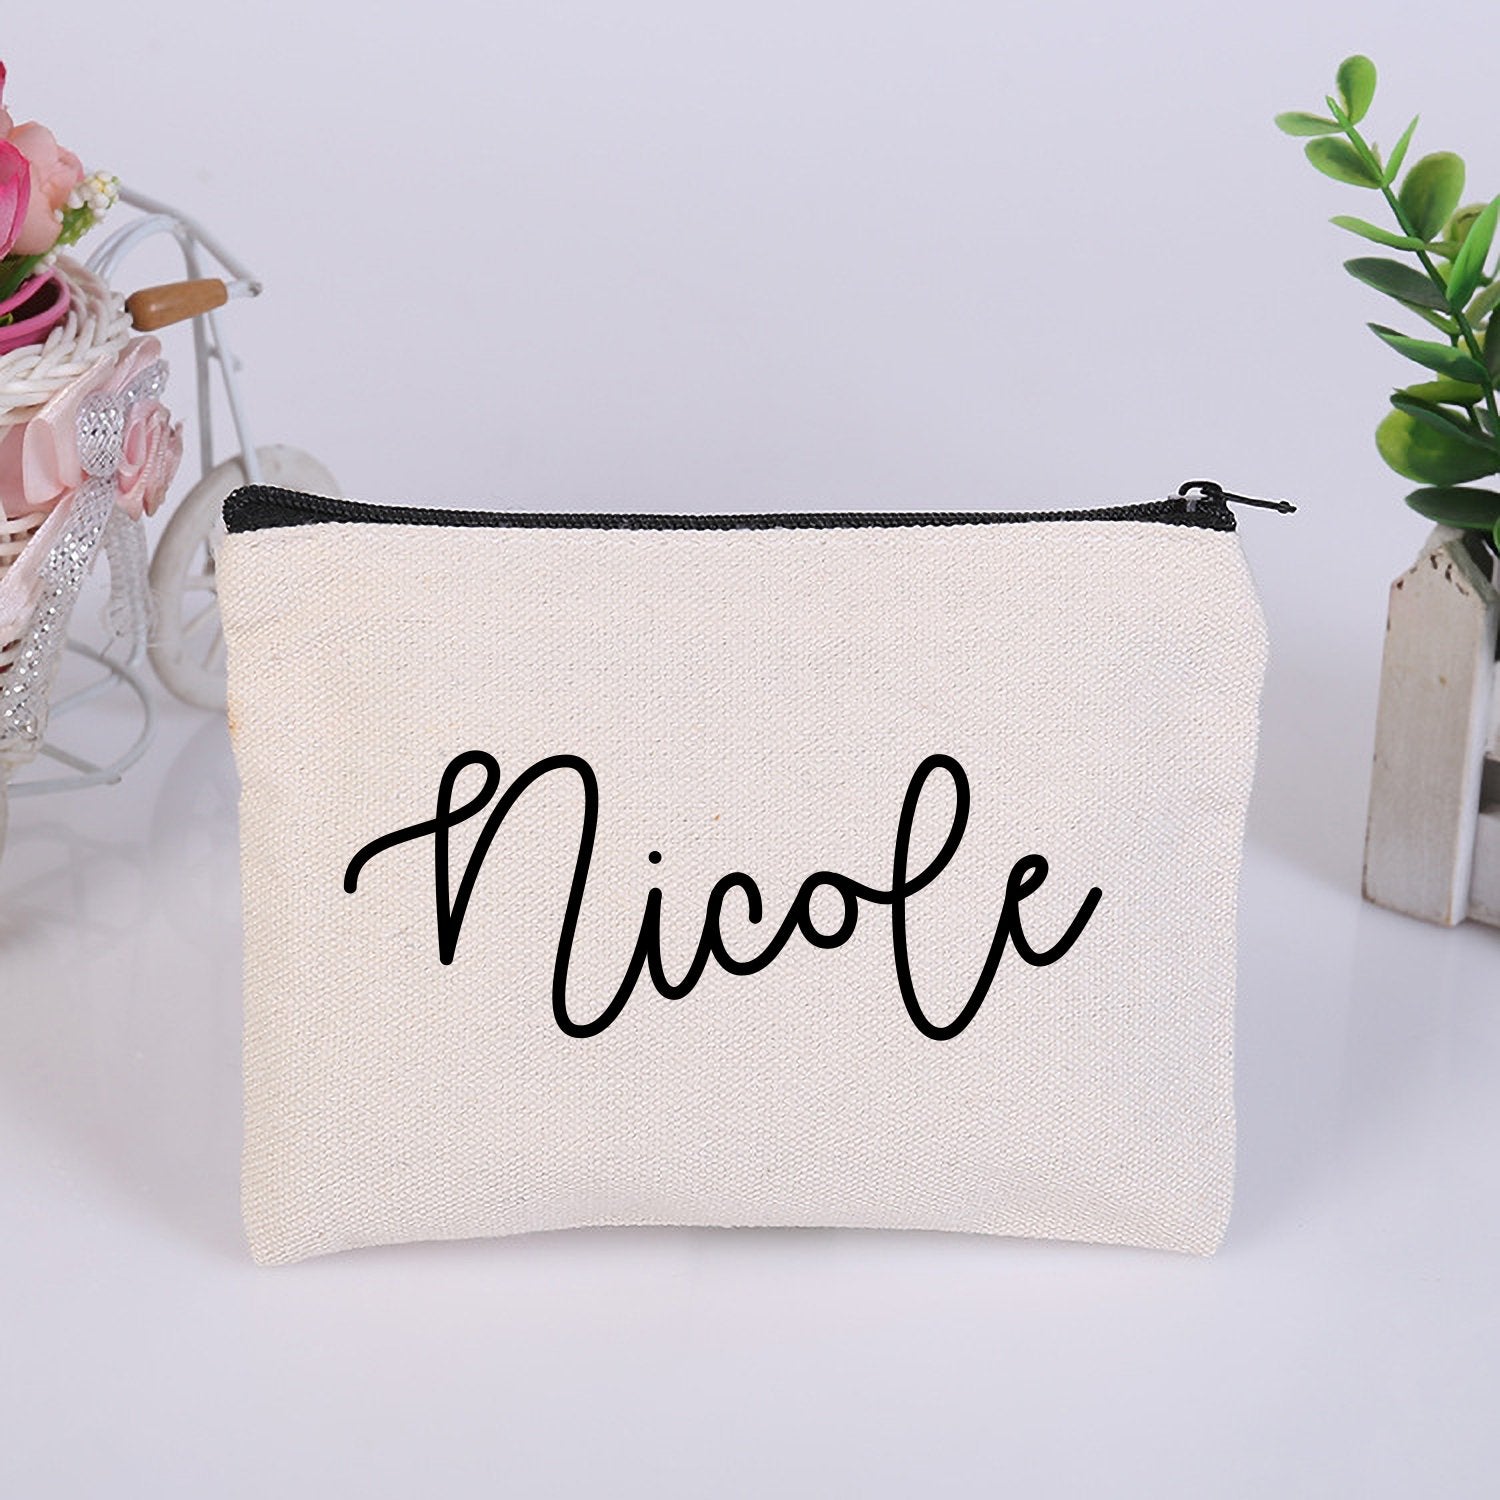 Canvas Makeup Bag Personalized Gift